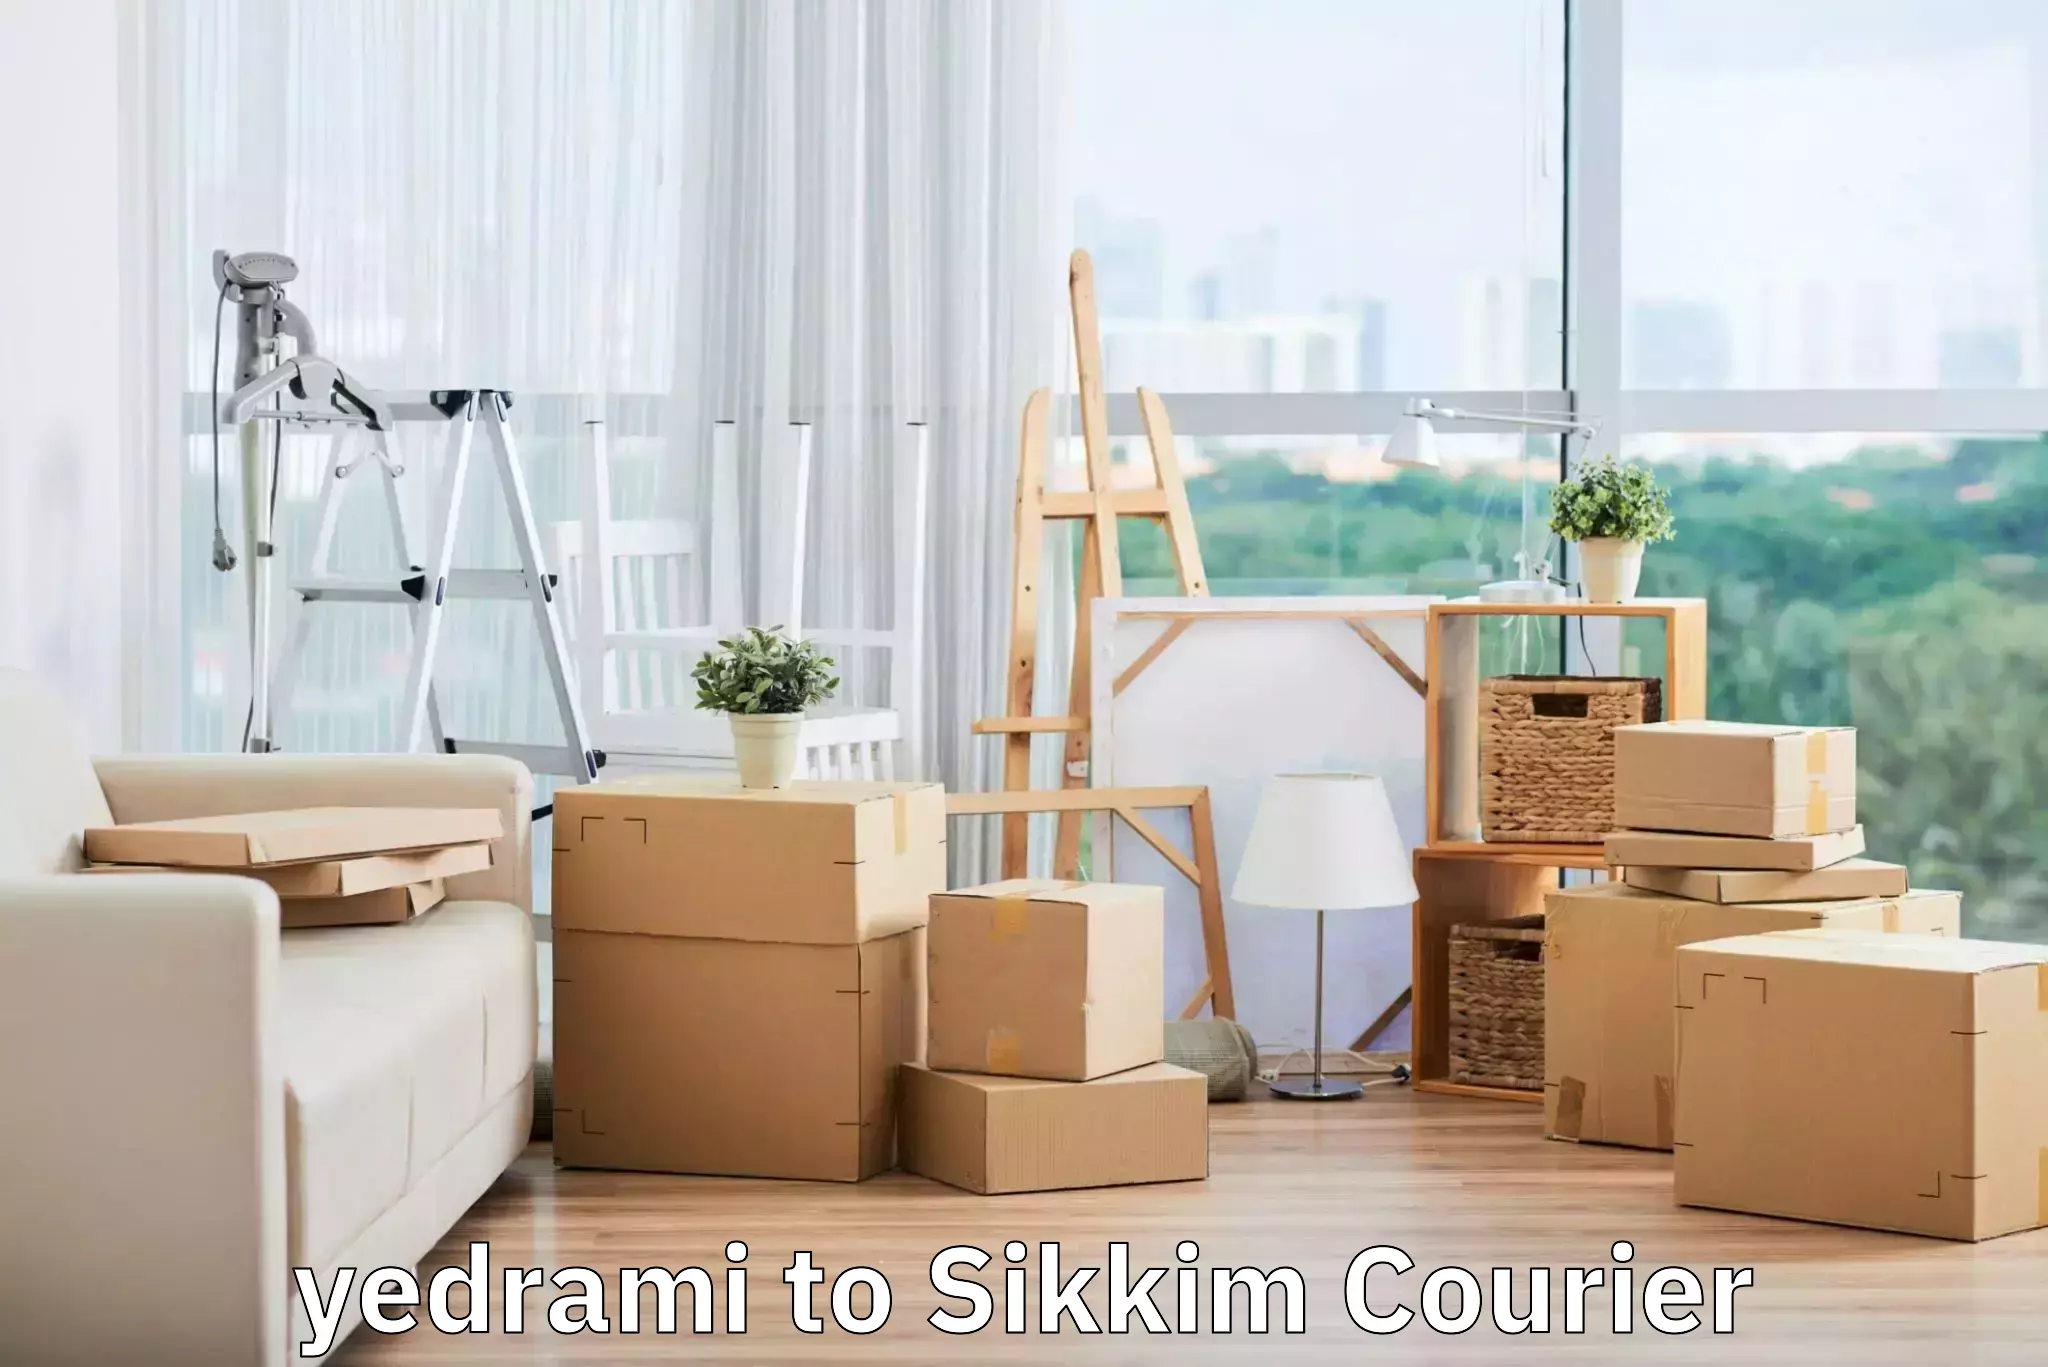 High-quality baggage shipment yedrami to East Sikkim